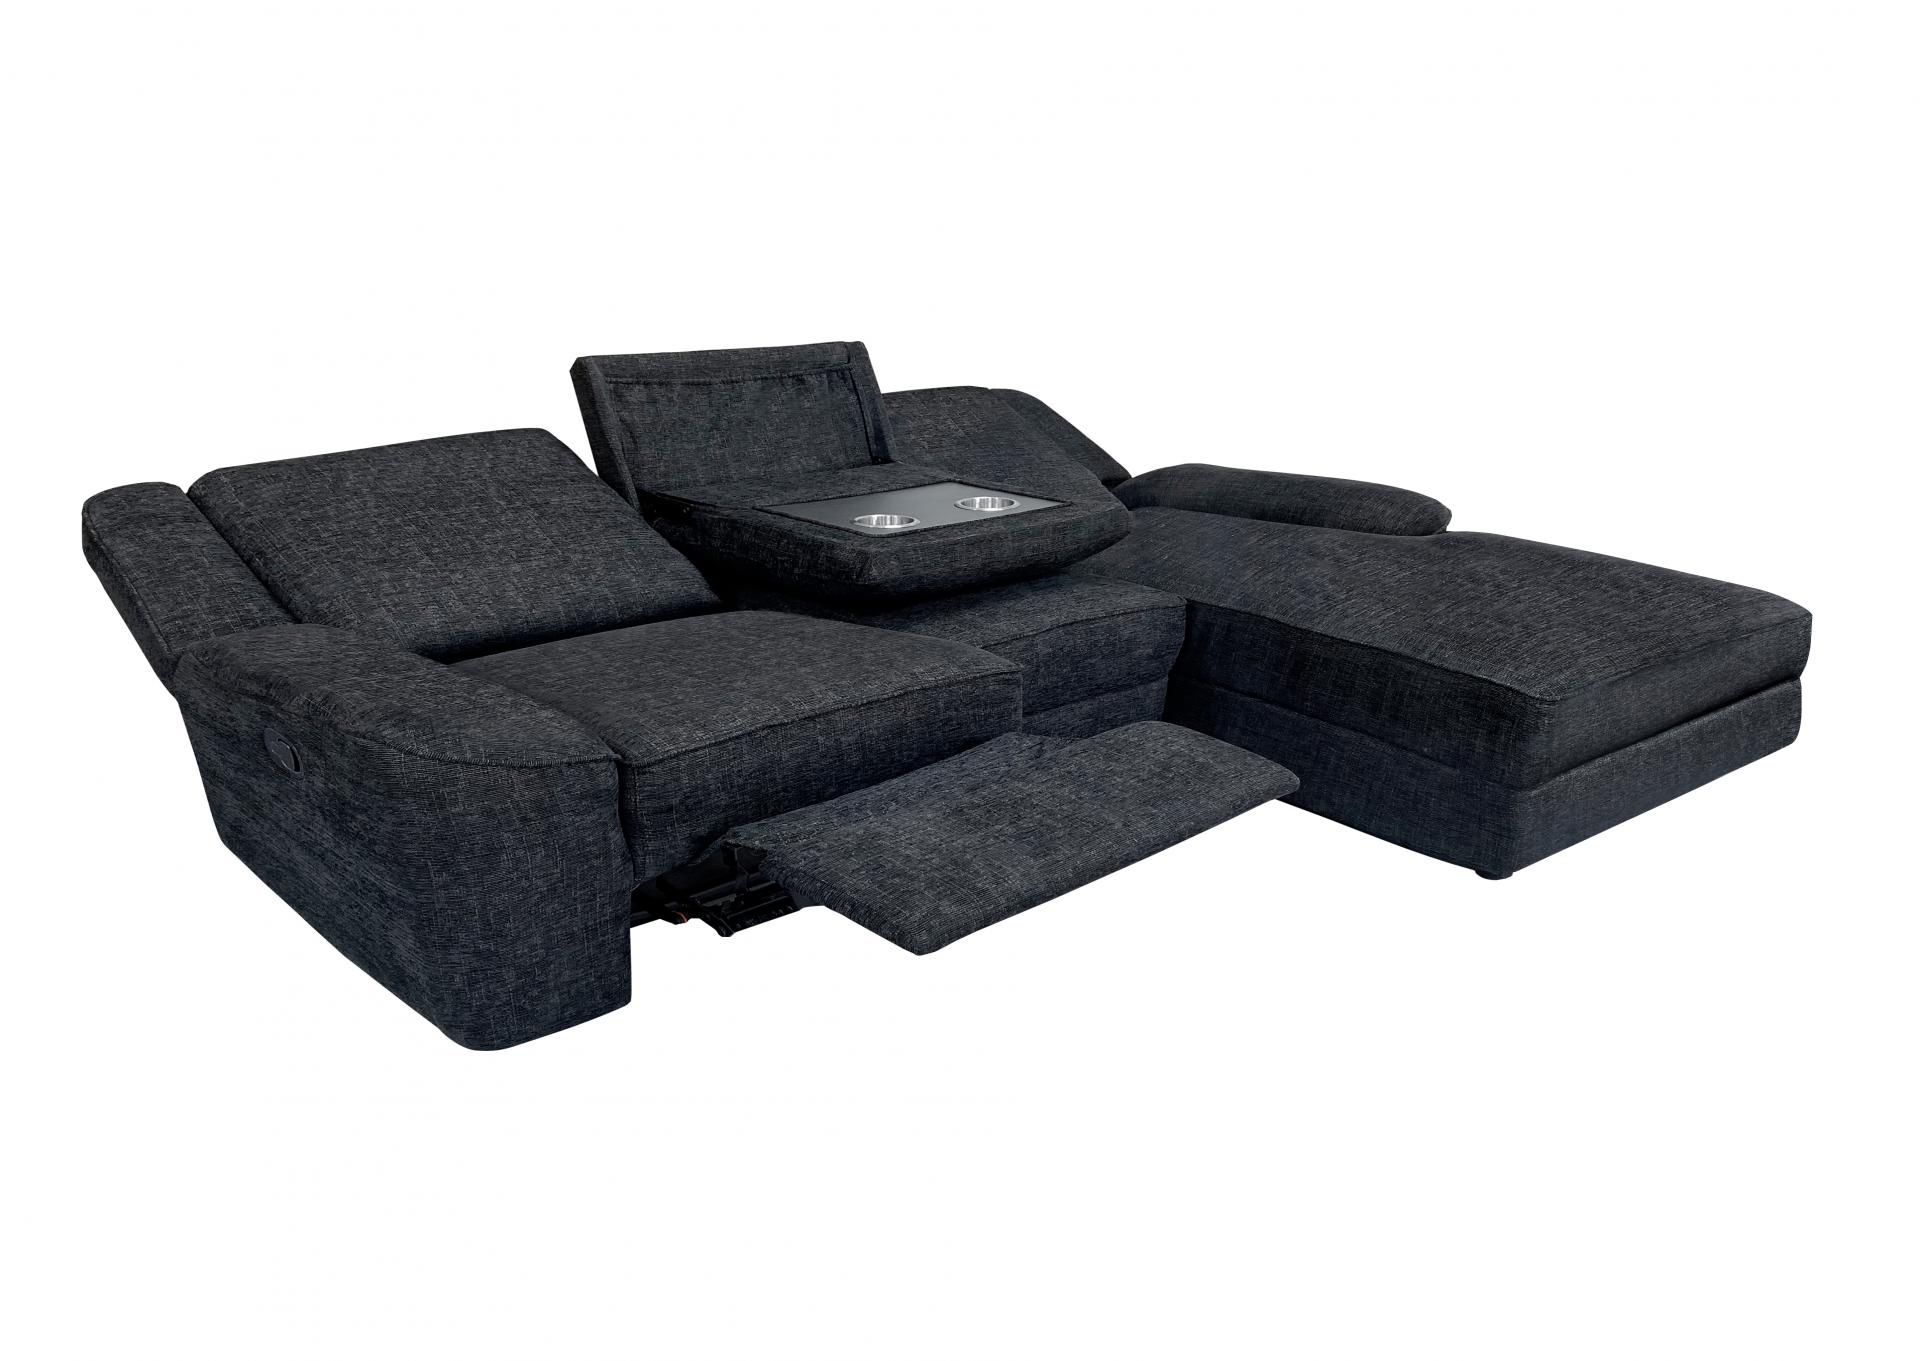 Monterey Ebony Reclining Sectional with Right Chaise,Homelegance